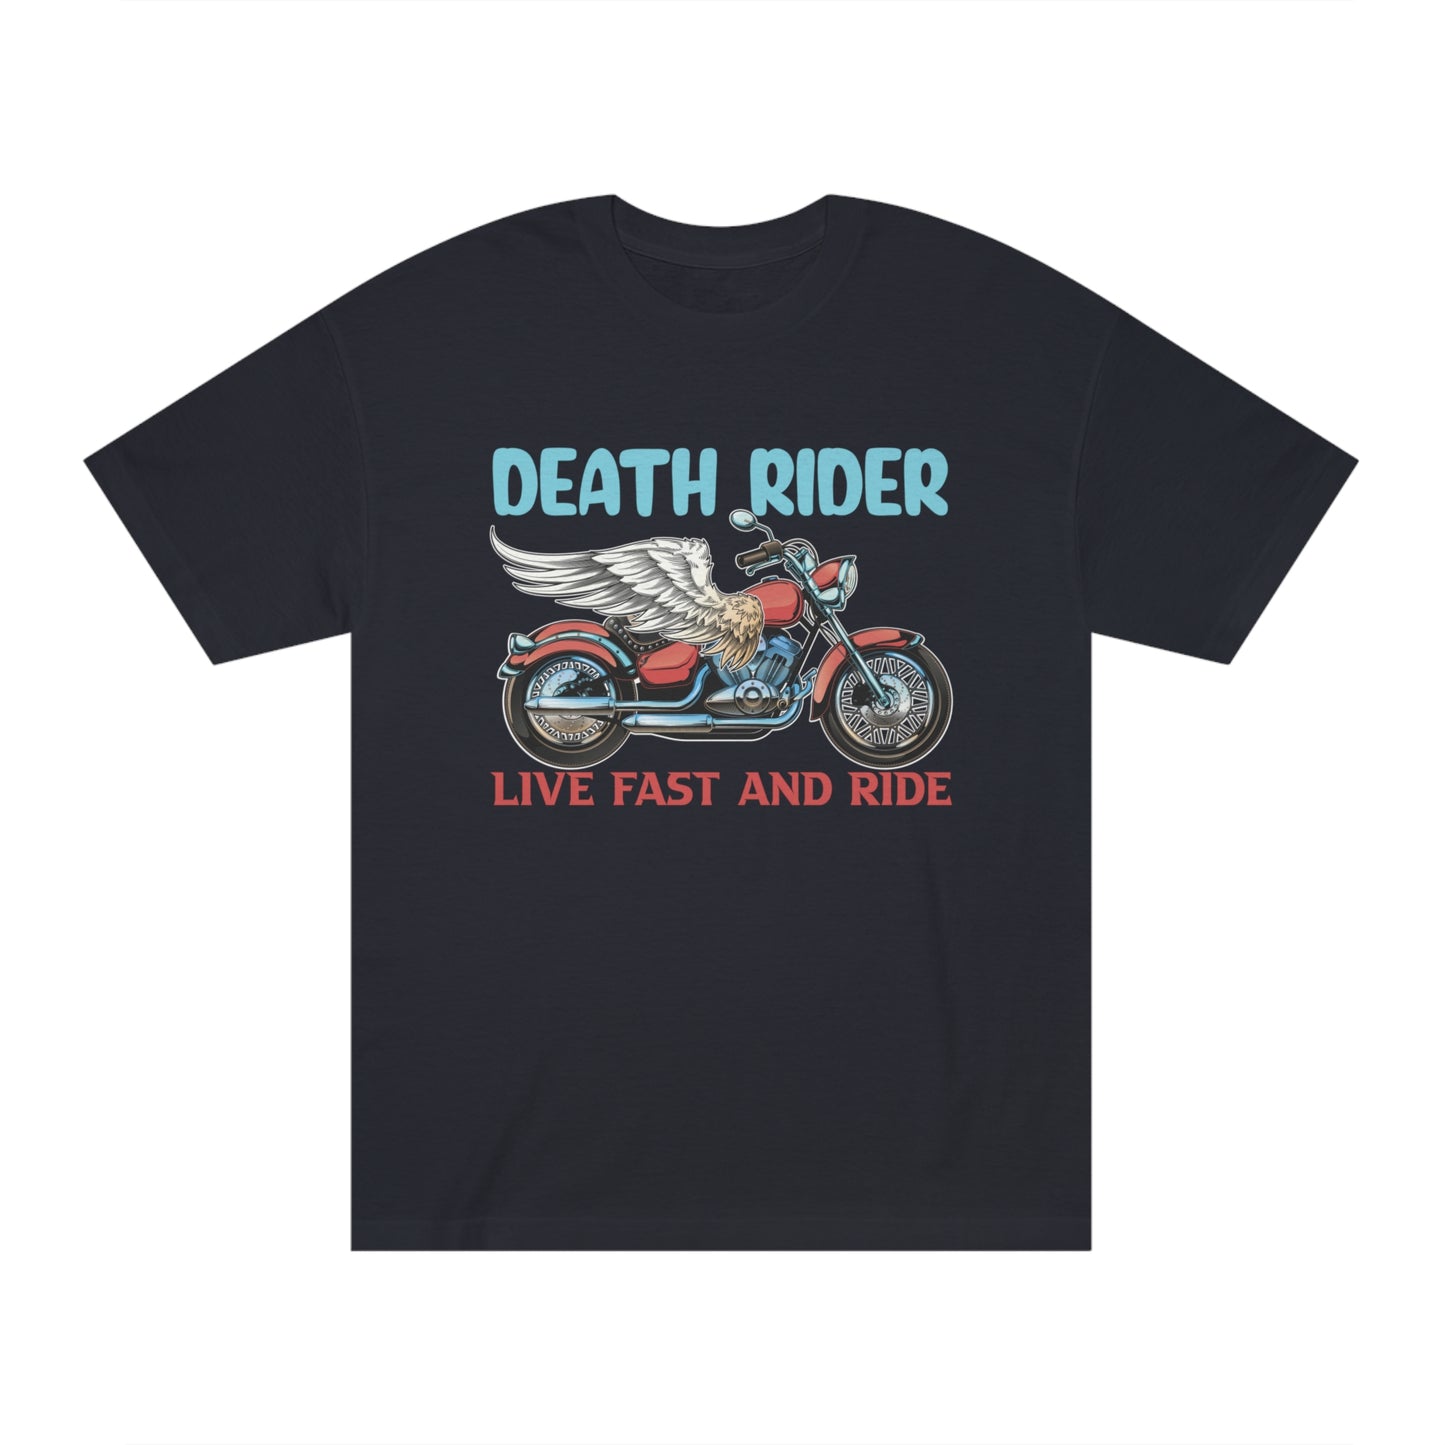 Death rider live fast and ride Unisex Classic Tee